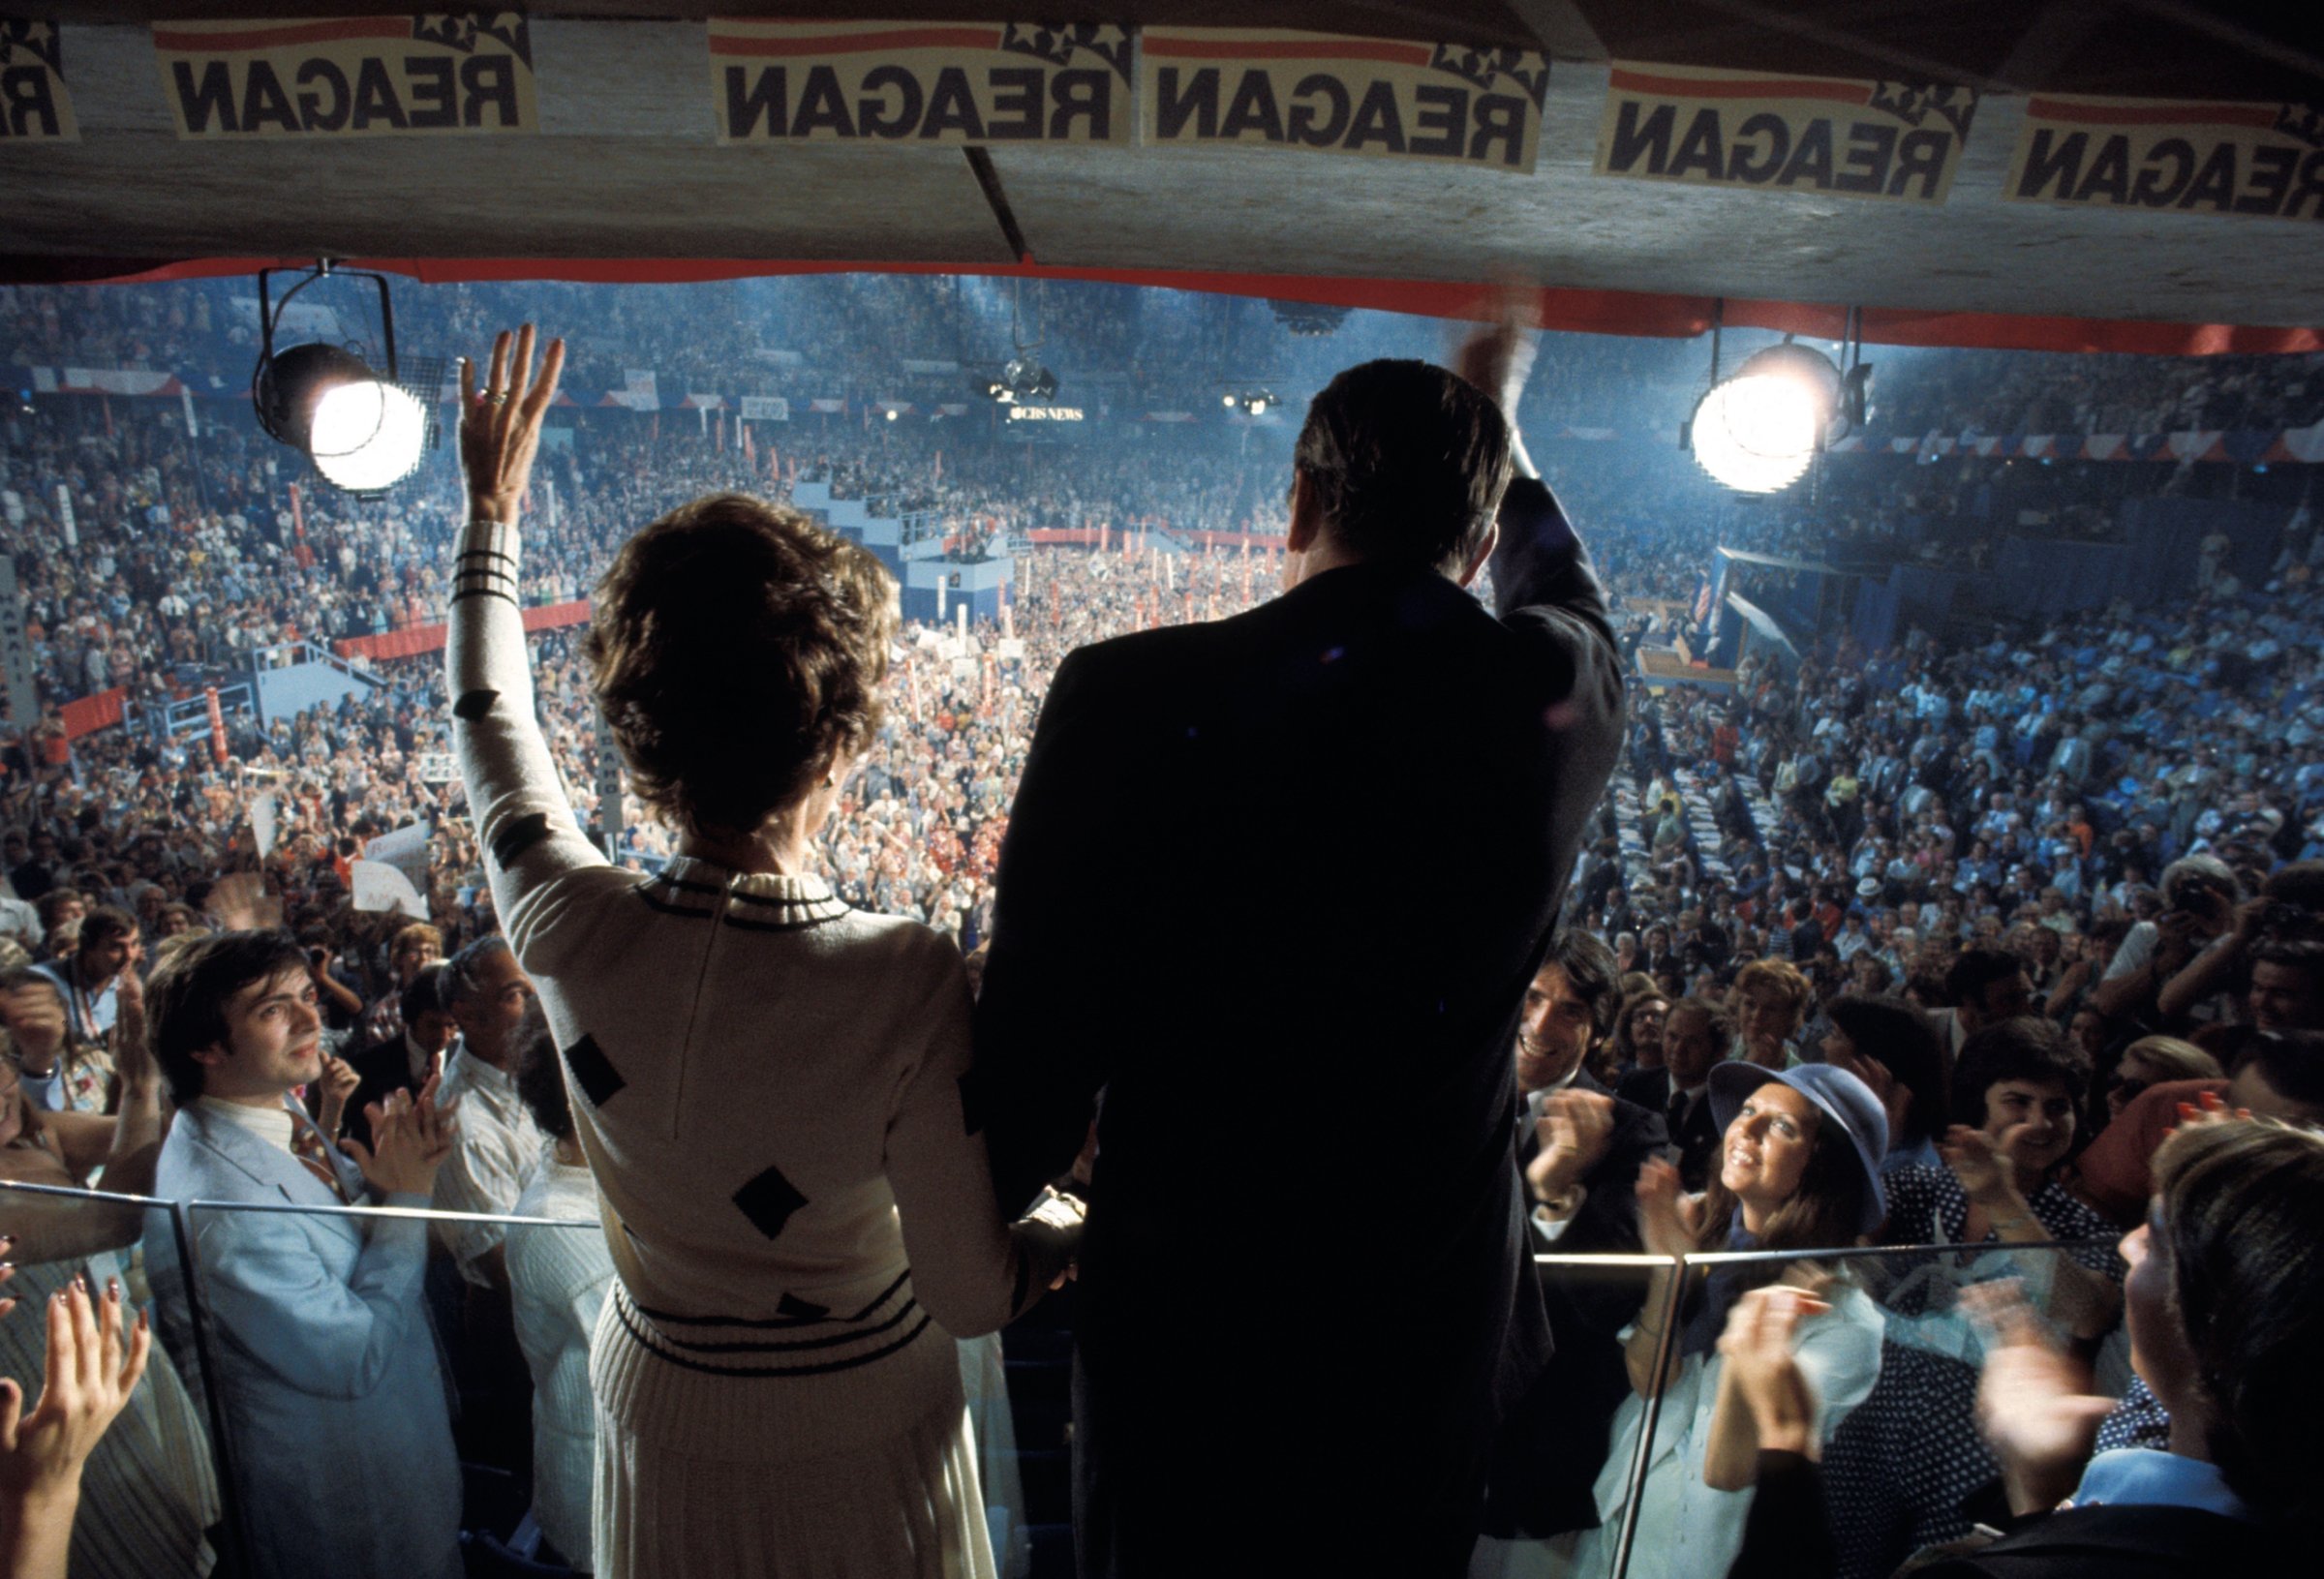 The Reagans wave to the crowd at the 1976 GOP Convention in Kansas City, where he narrowly lost the nomination to Ford